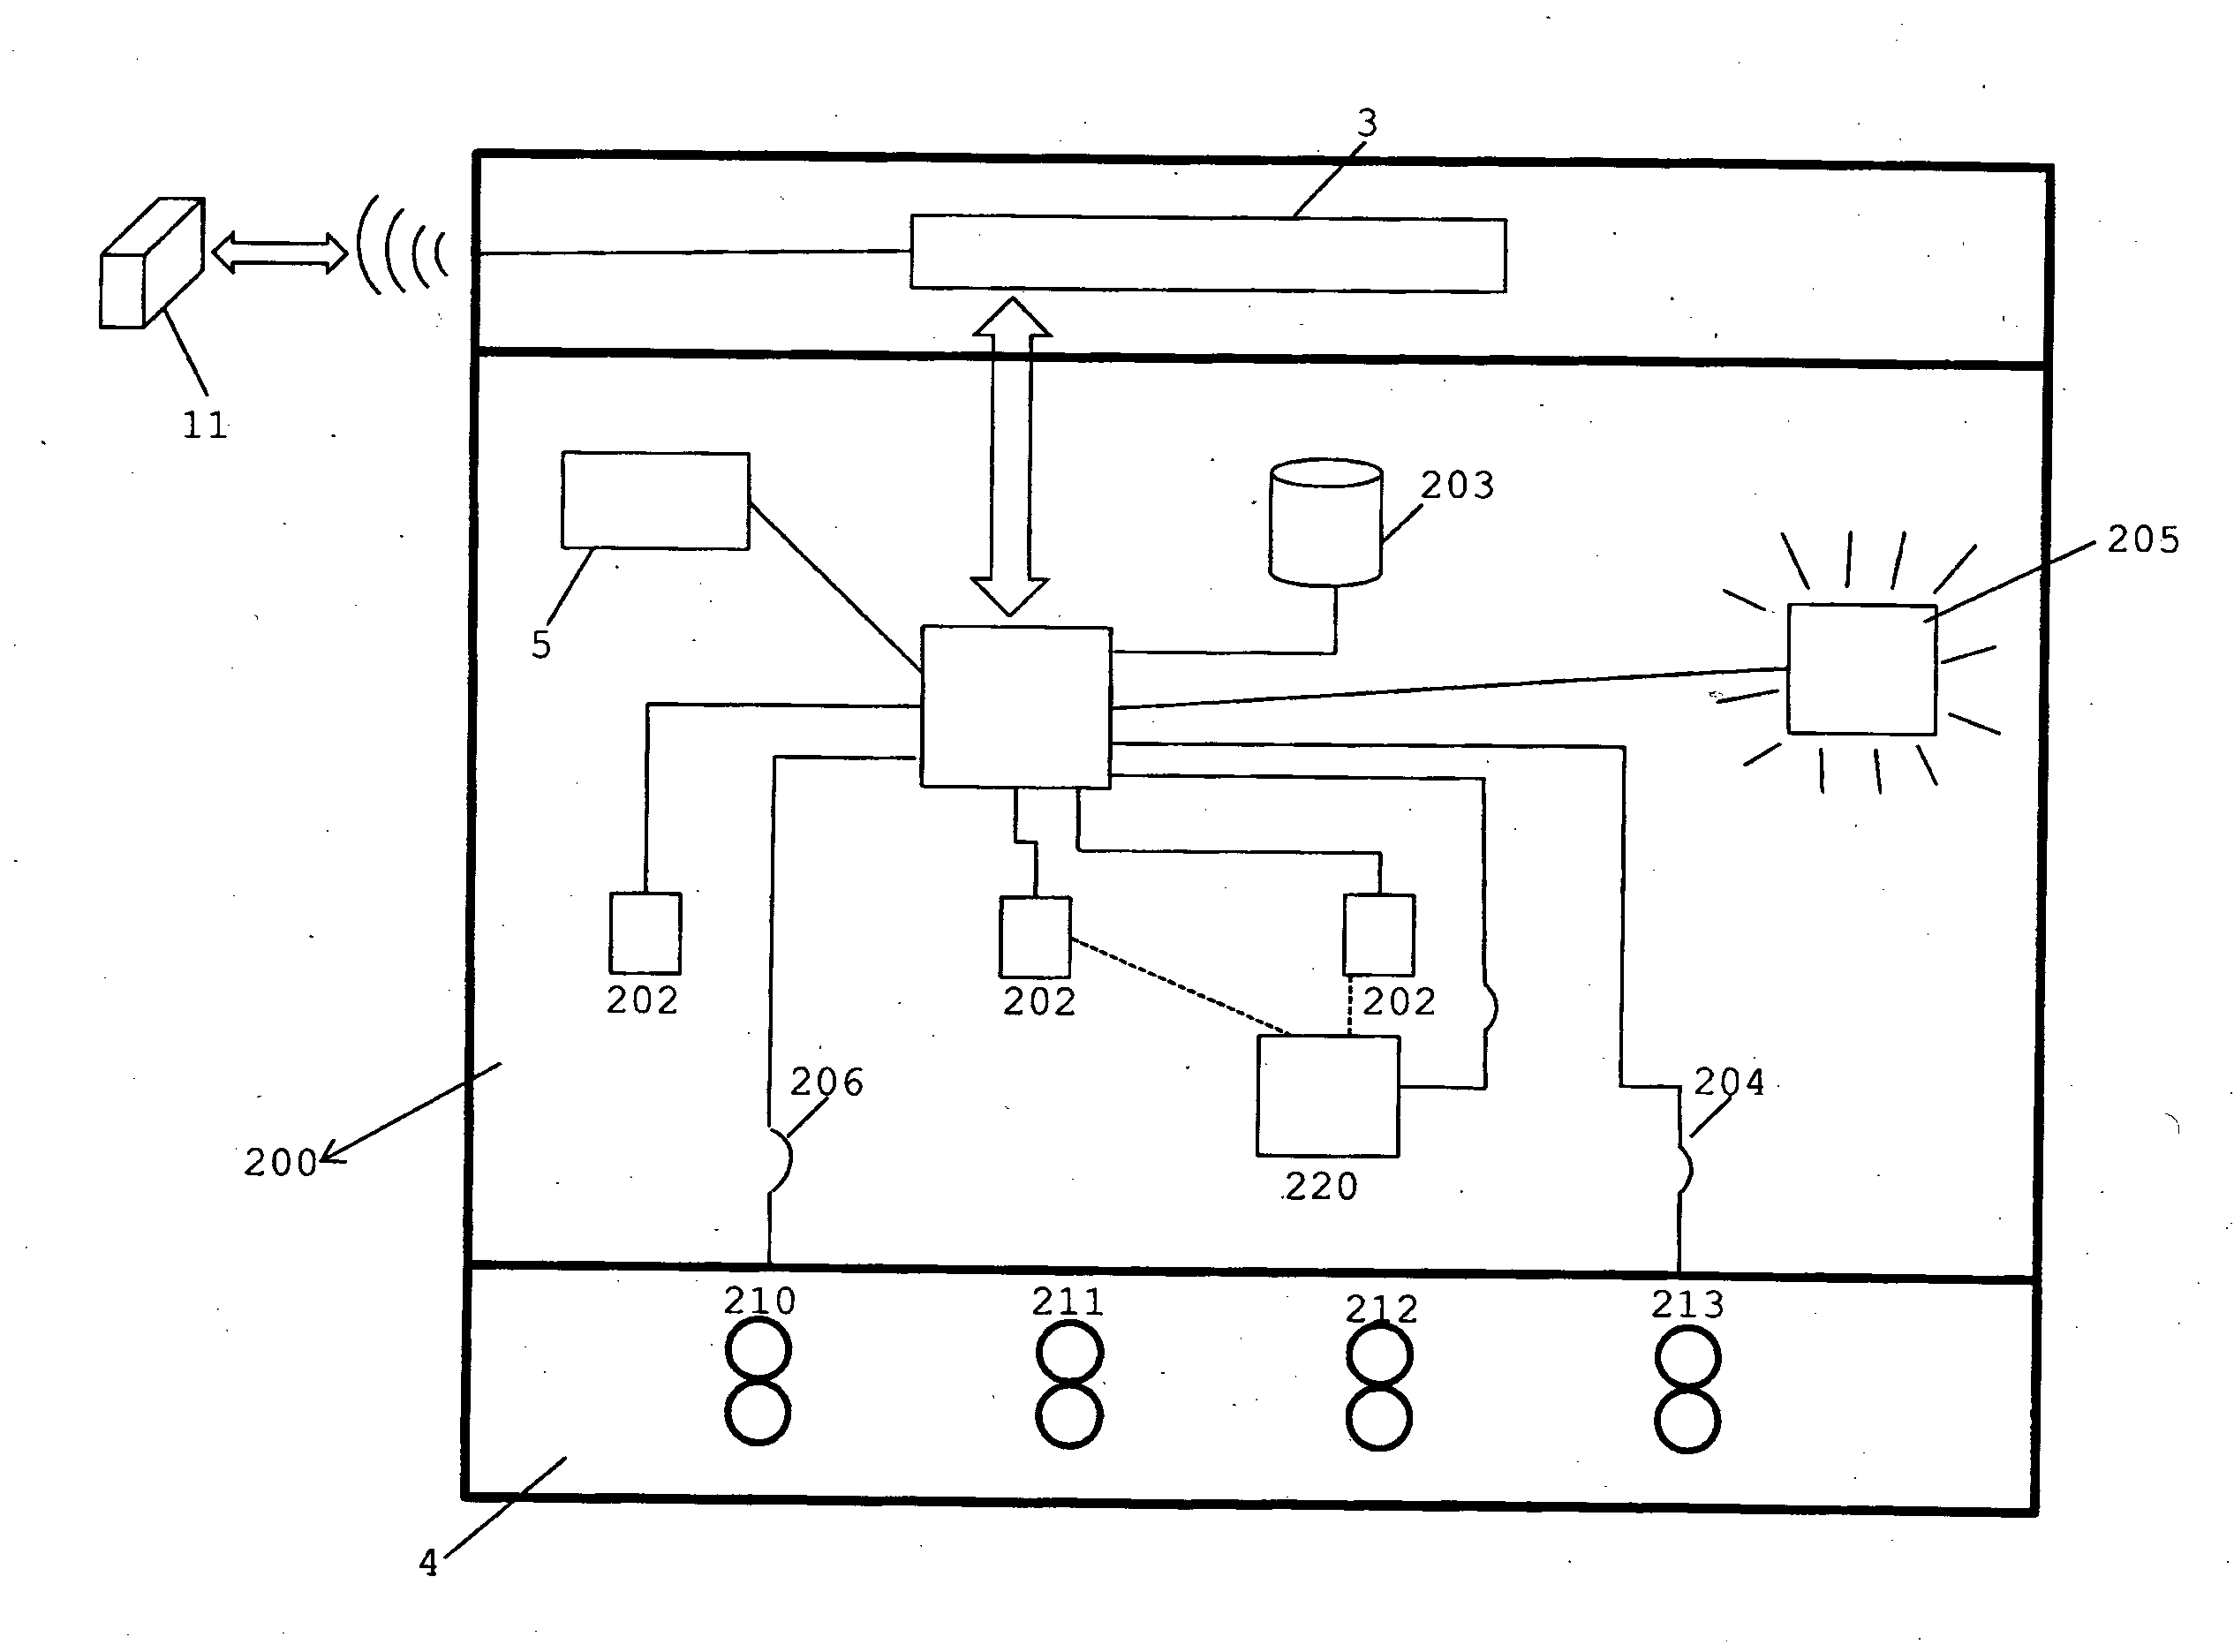 Method and apparatus for monitoring a condition of a meter